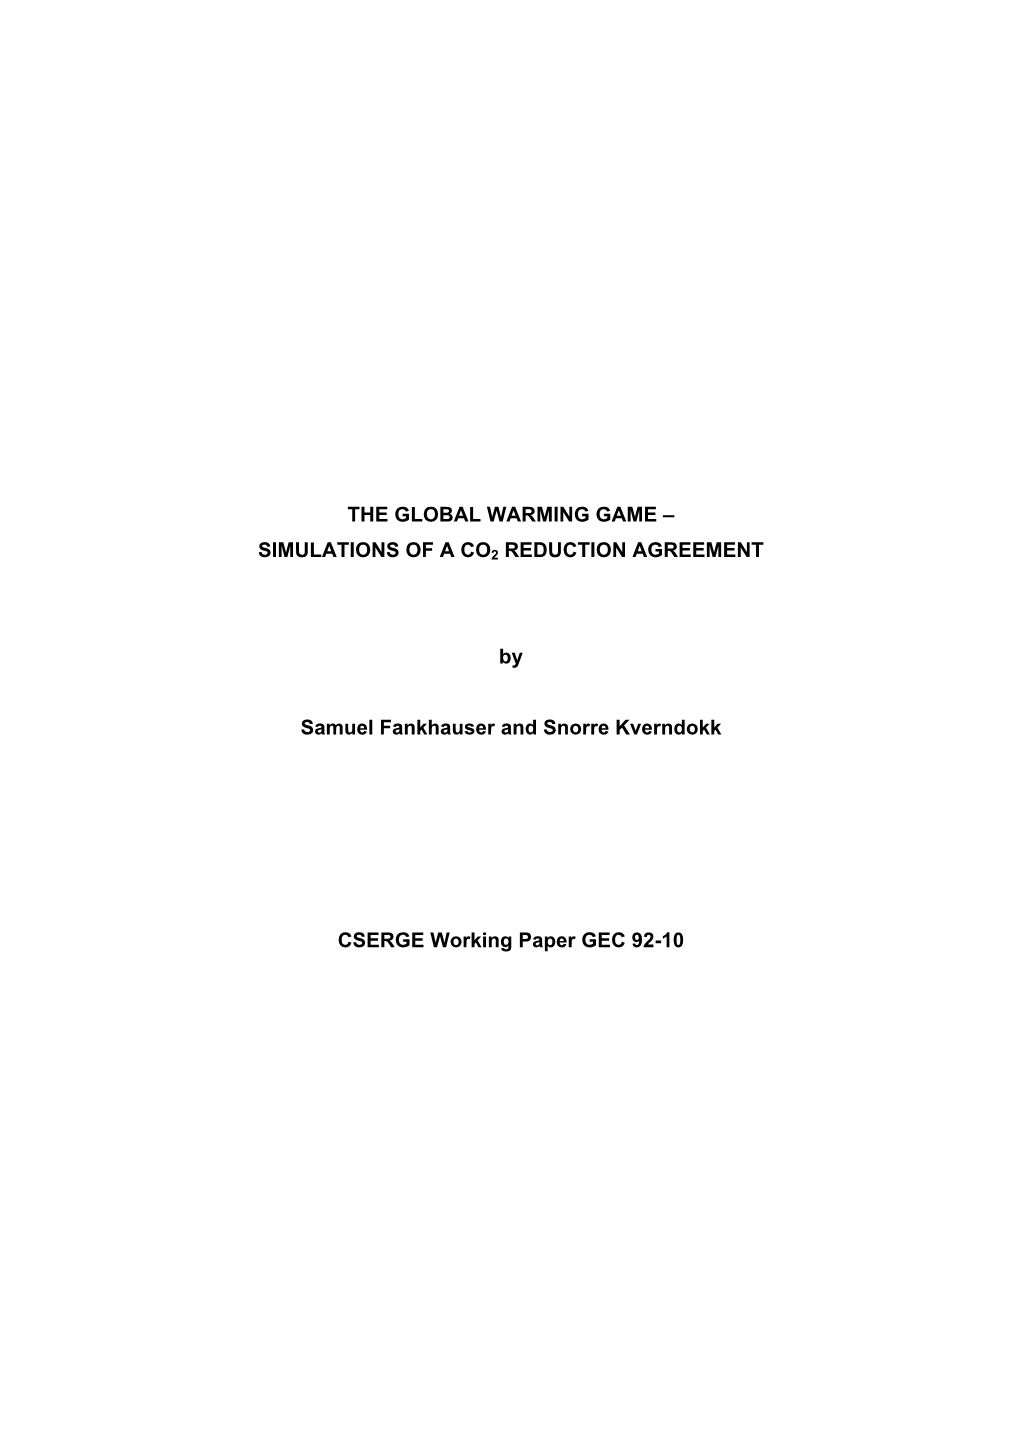 THE GLOBAL WARMING GAME – SIMULATIONS of a CO2 REDUCTION AGREEMENT by Samuel Fankhauser and Snorre Kverndokk CSERGE Working P